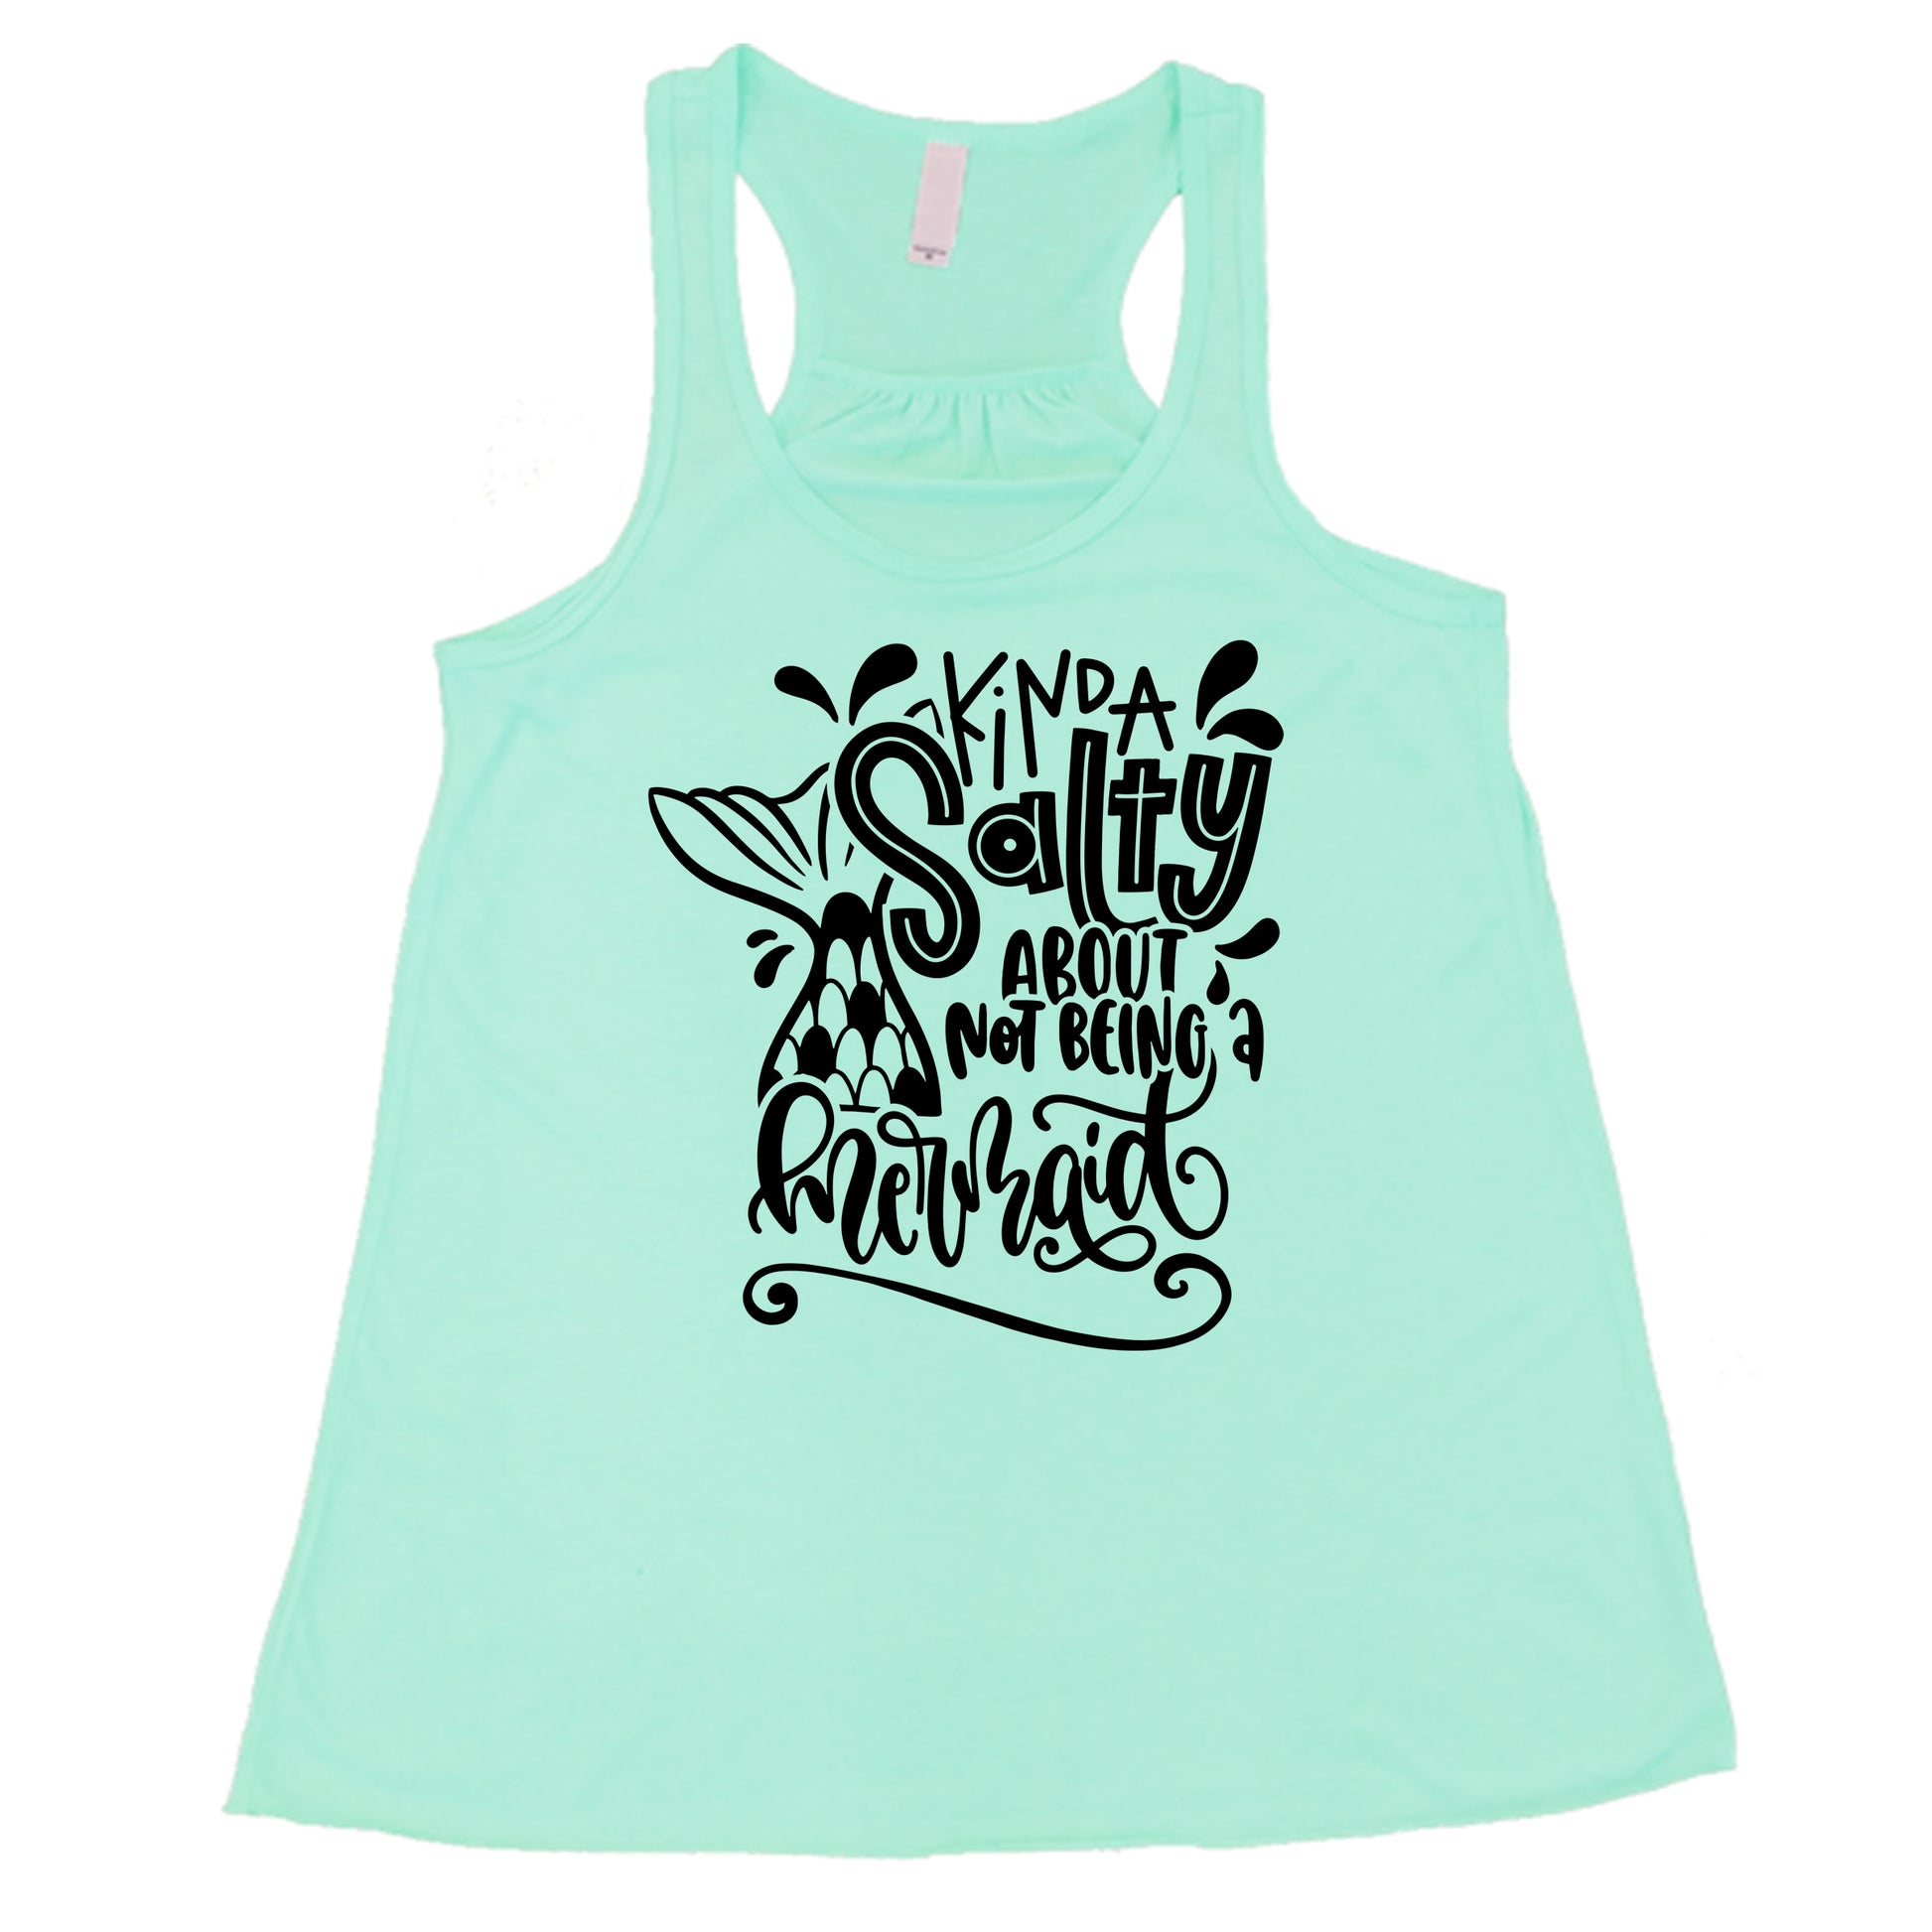 mint racerback tank with the saying "kinda salty about not being a mermaid" in the center